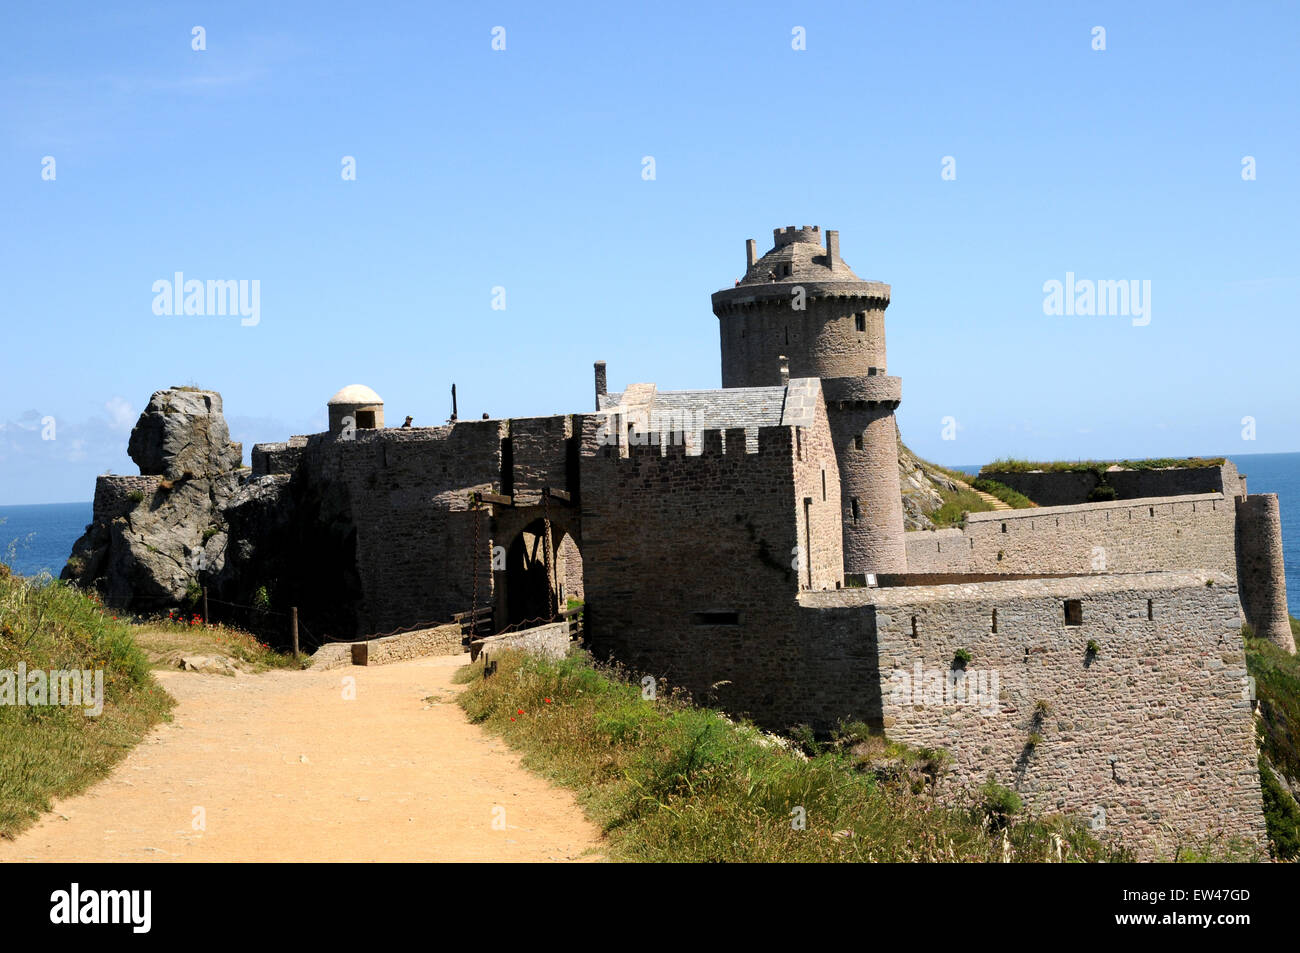 Fort La Latte, dating from the 14th century is on a rocky headland overlooking the wild north Breton coast near Frehel. Stock Photo